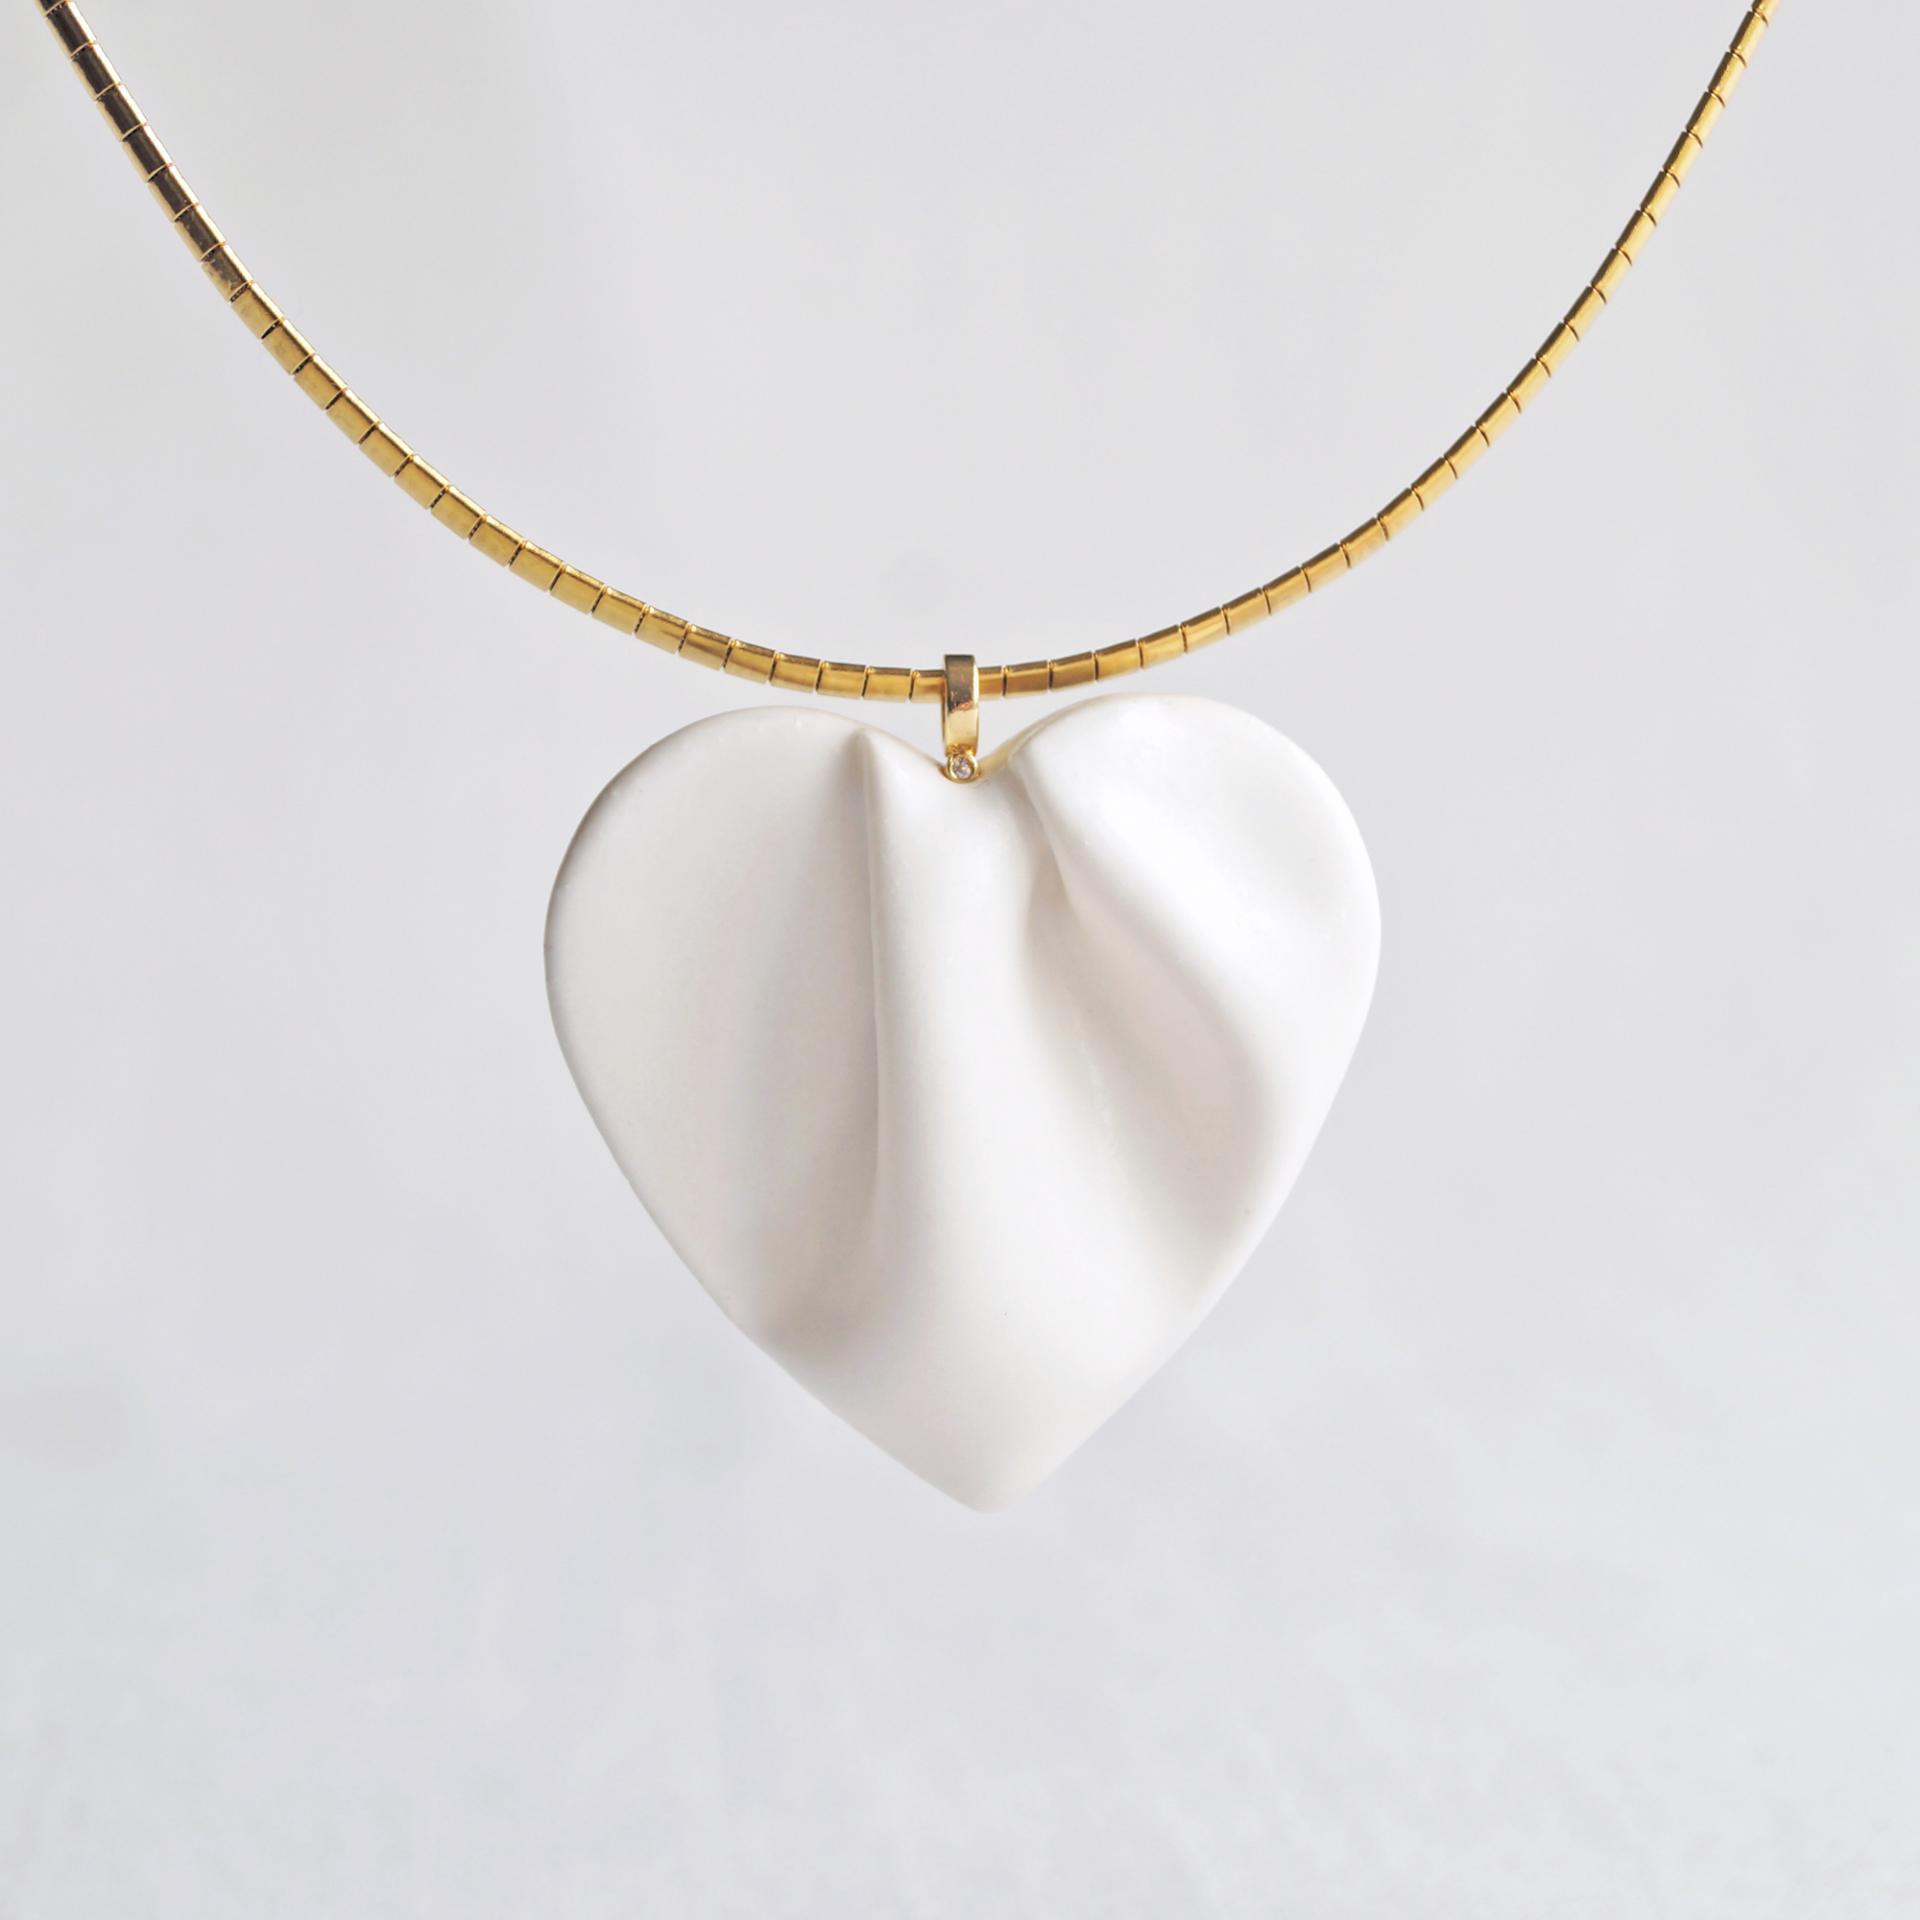 Bride necklace, white satin, draped heart, porcelain heart, heart necklace, gold, stainless steel, omega necklet, 18th weddin